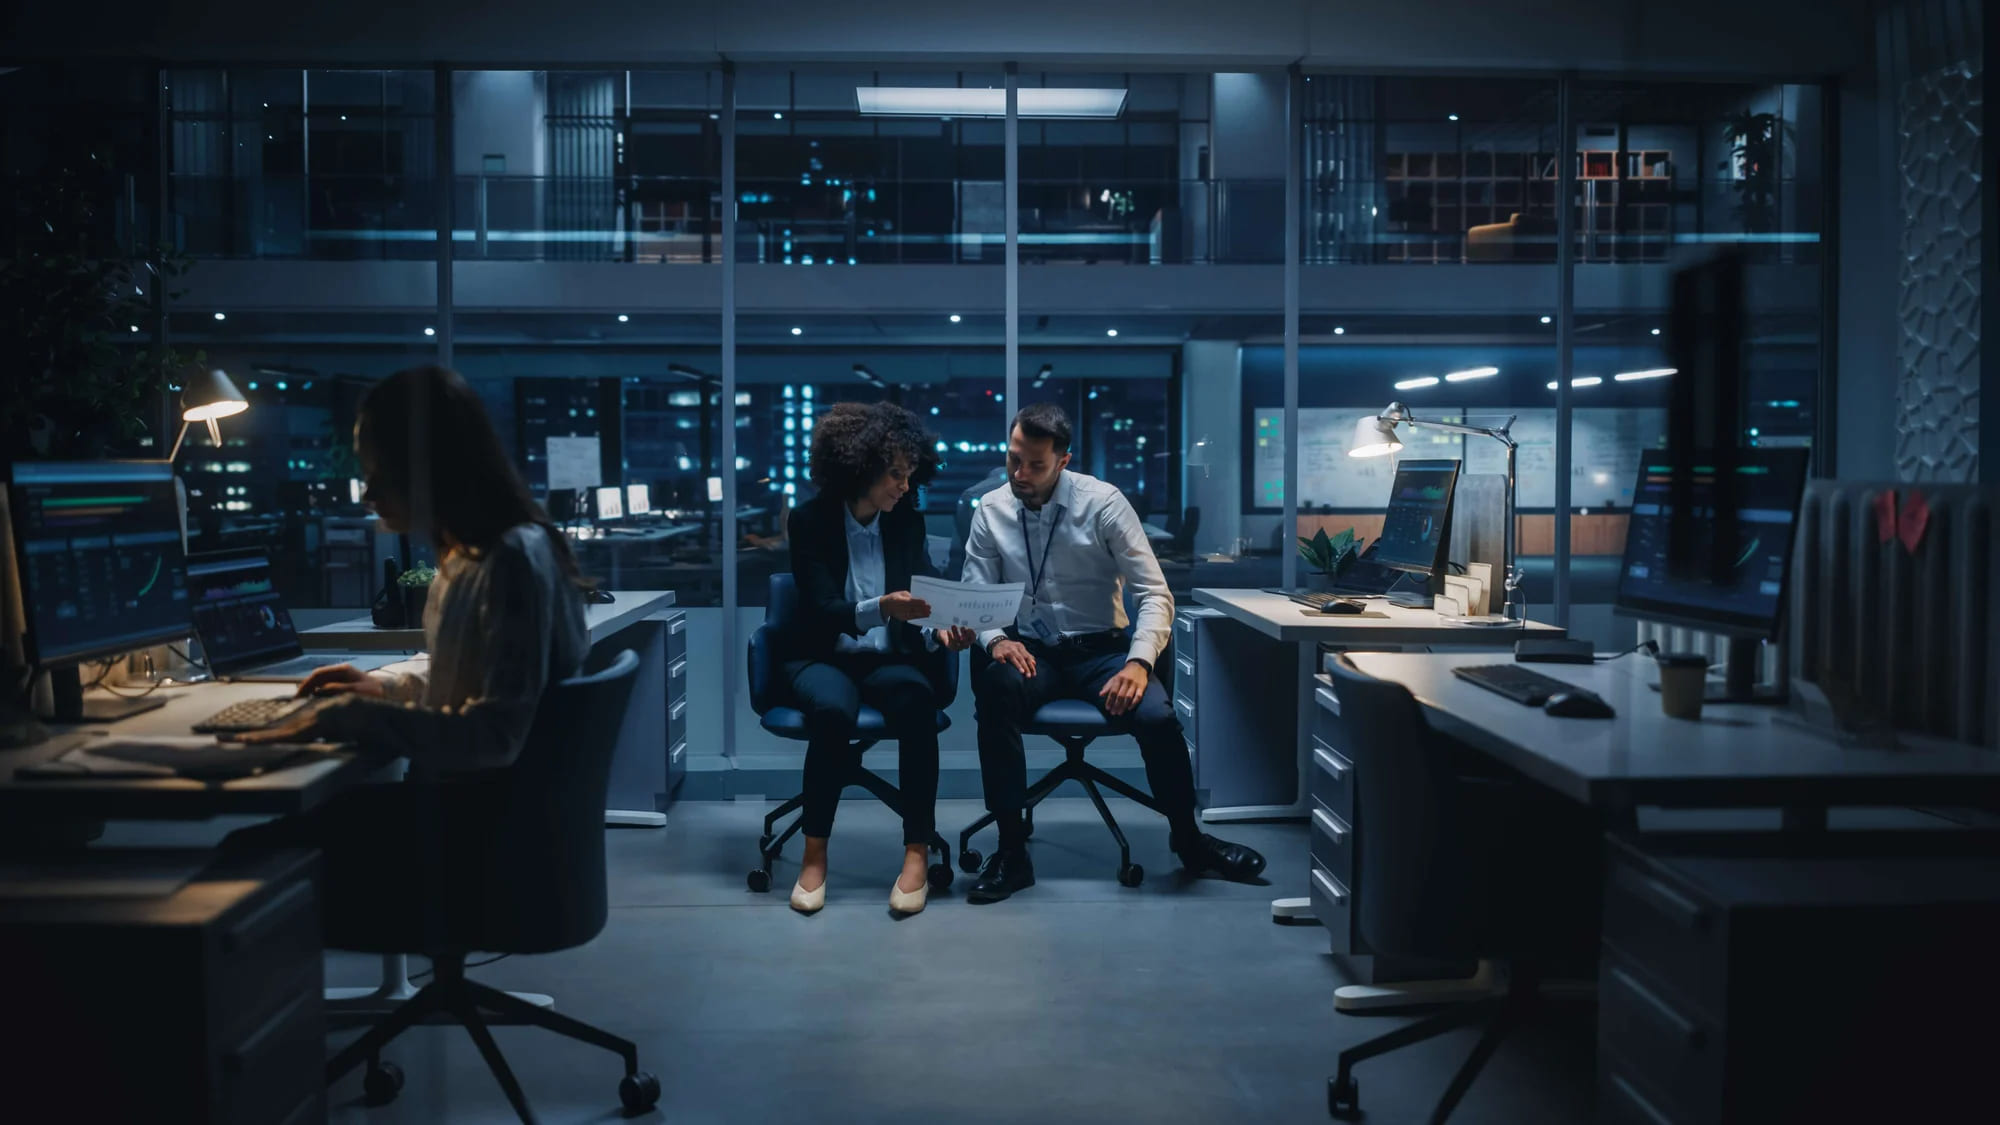 Two people sitting at desks in an office at night.